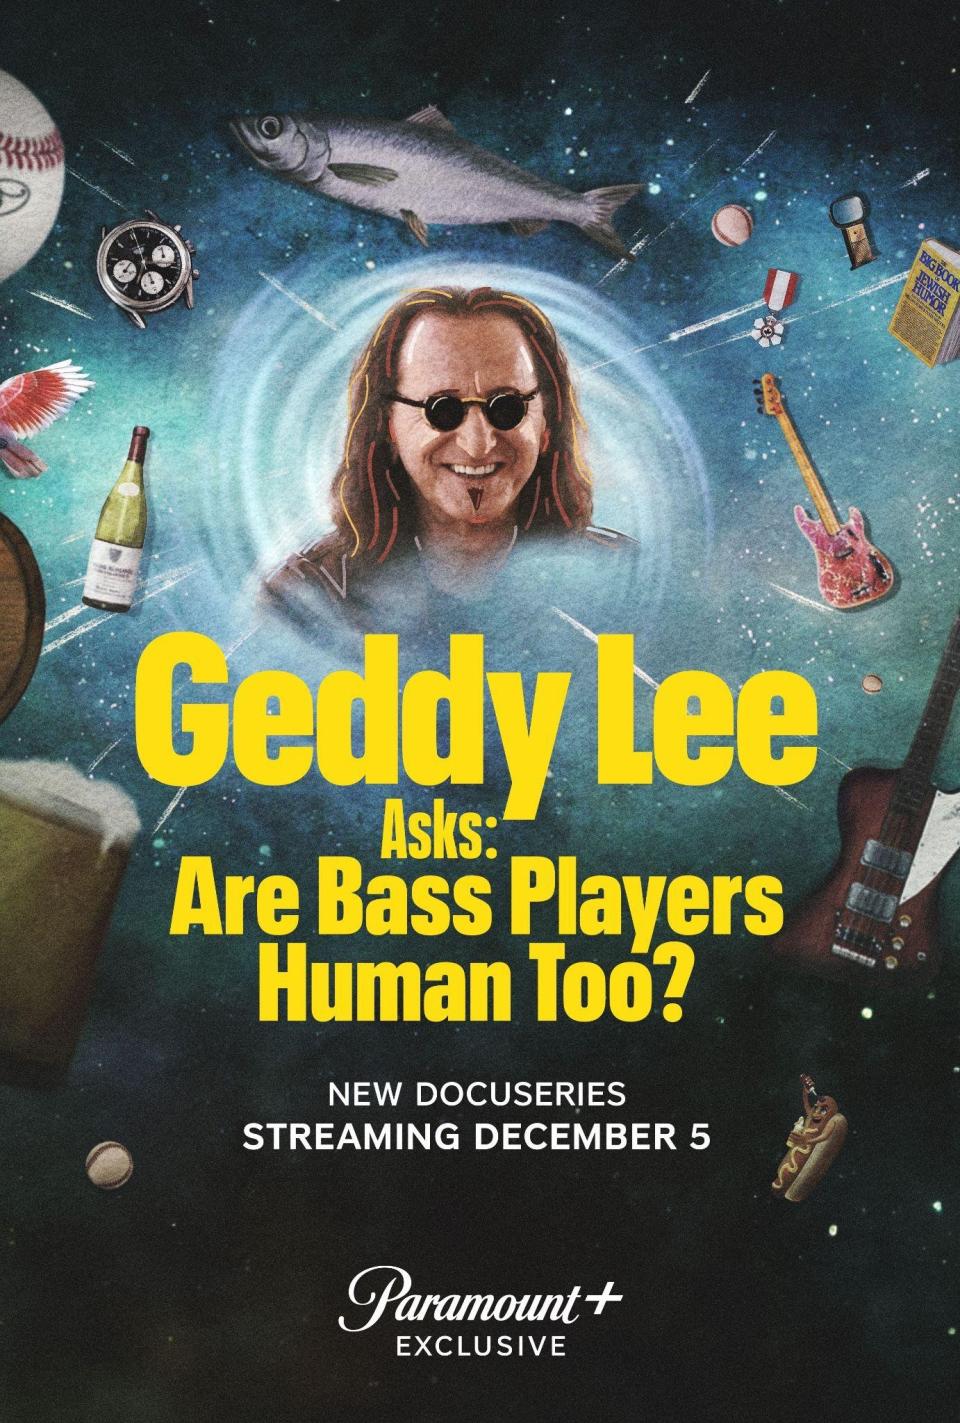 Geddy Lee Doc Poster